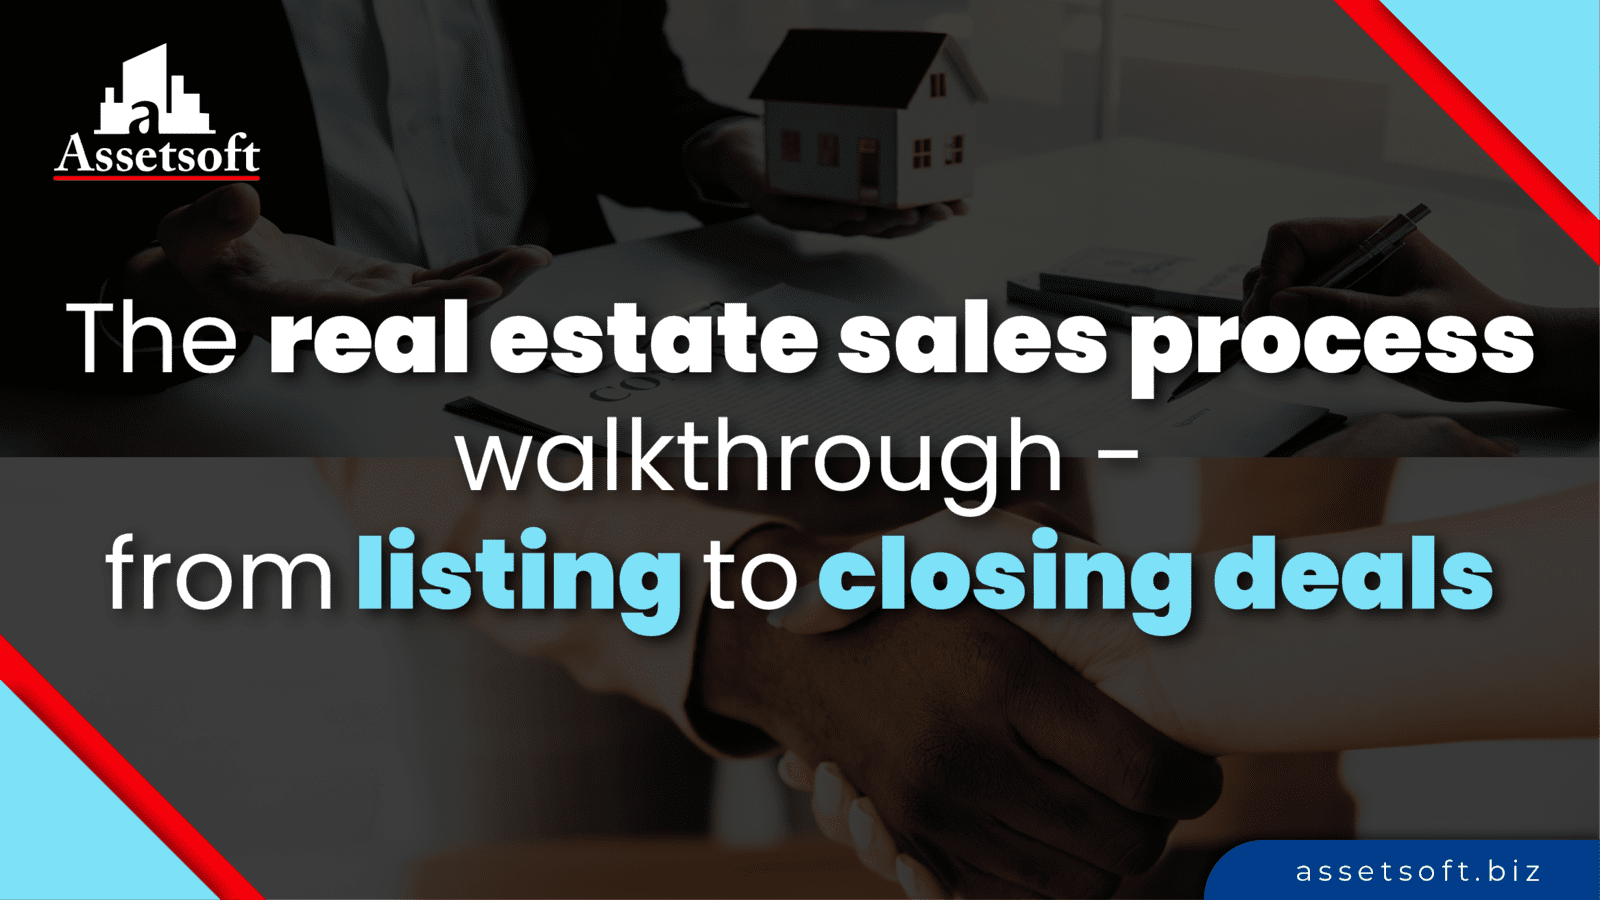 The Real Estate Sales Process Walkthrough - from listing to closing deals 